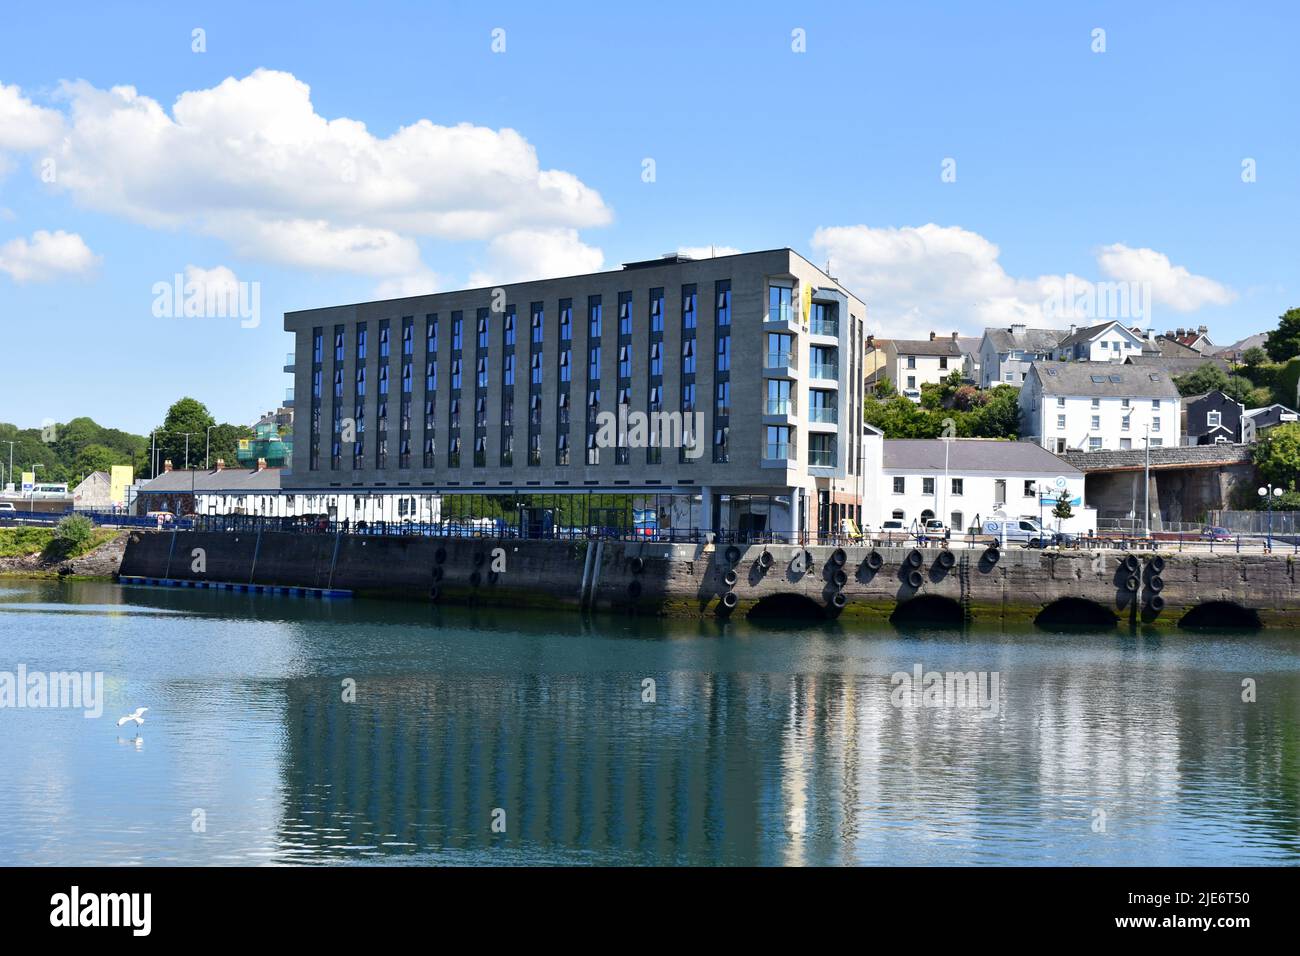 Ty hotel, Milford waterfront, Milford Haven, Pembrokeshire, Wales Stock Photo